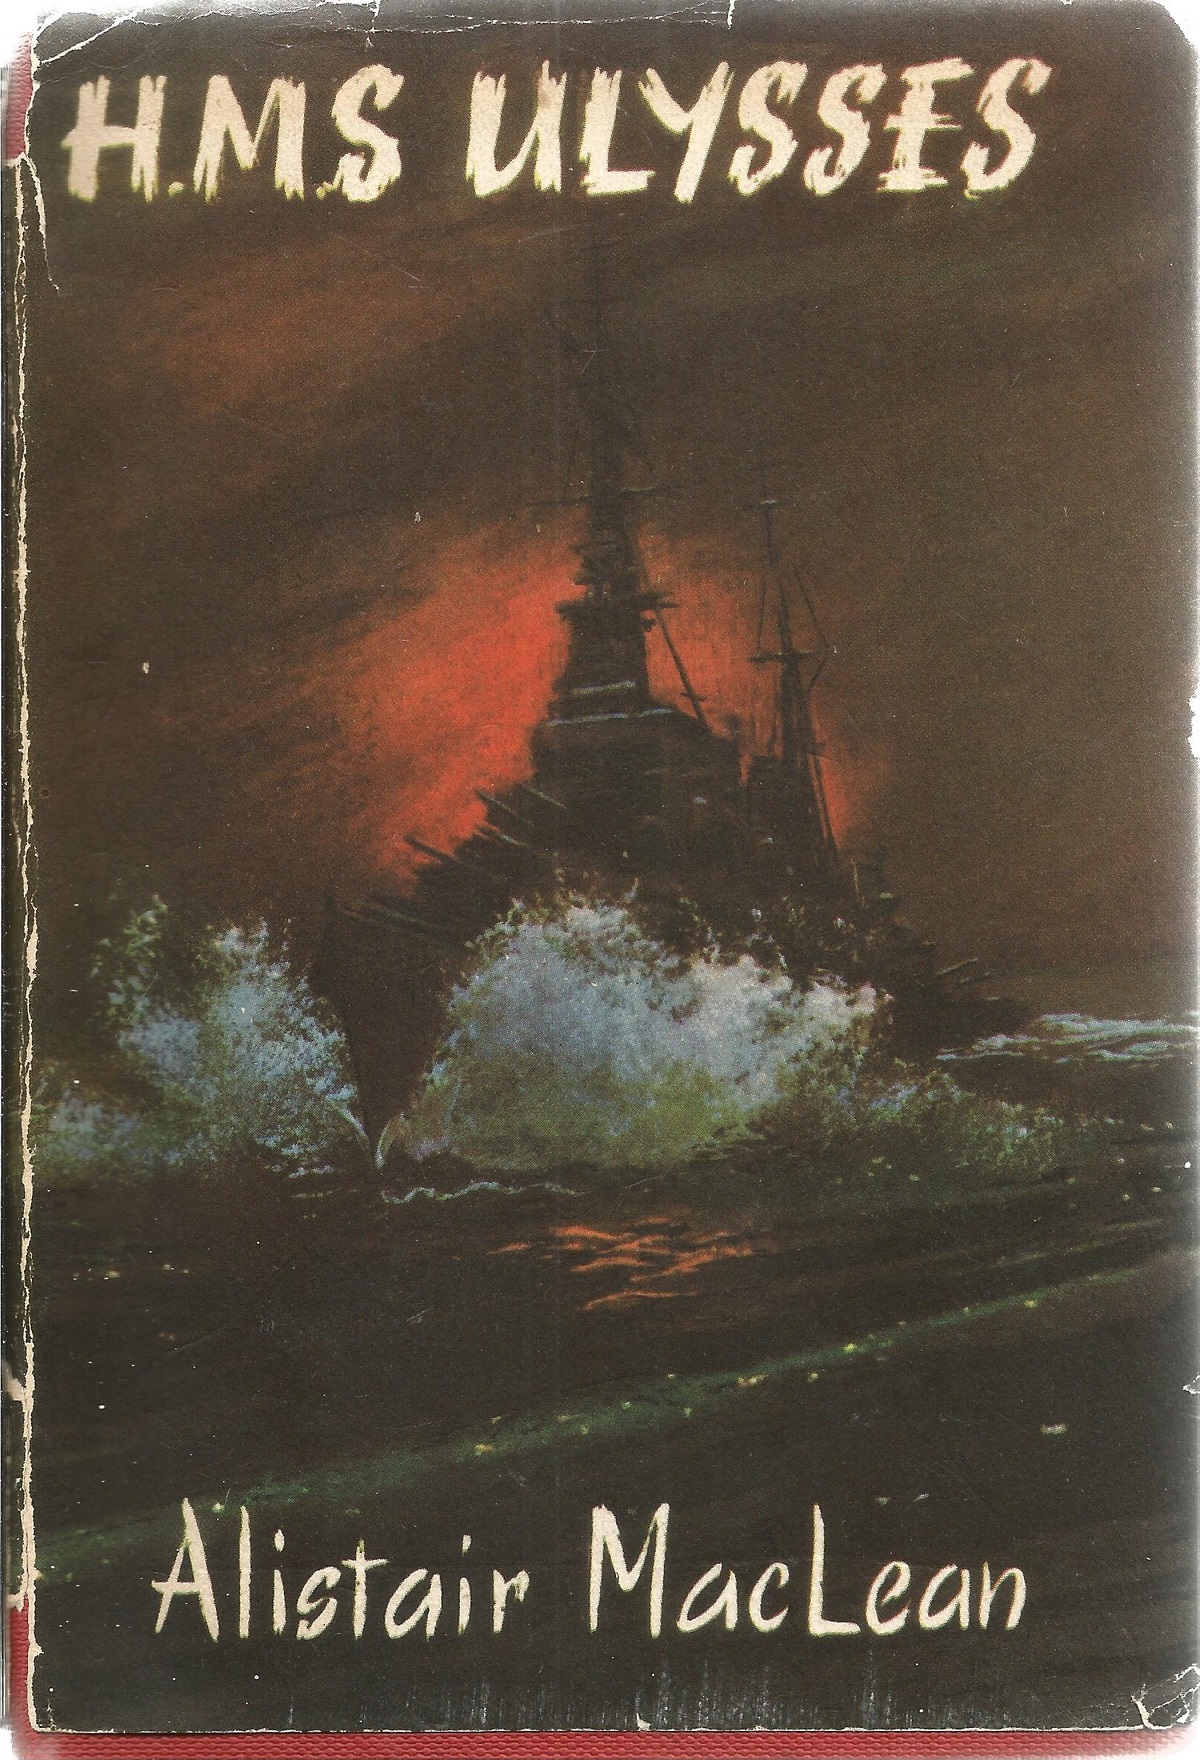 H. M. S. Ulysses by Alistair MacLean Hardback Book 1955 published by Collins Clear Type Press with